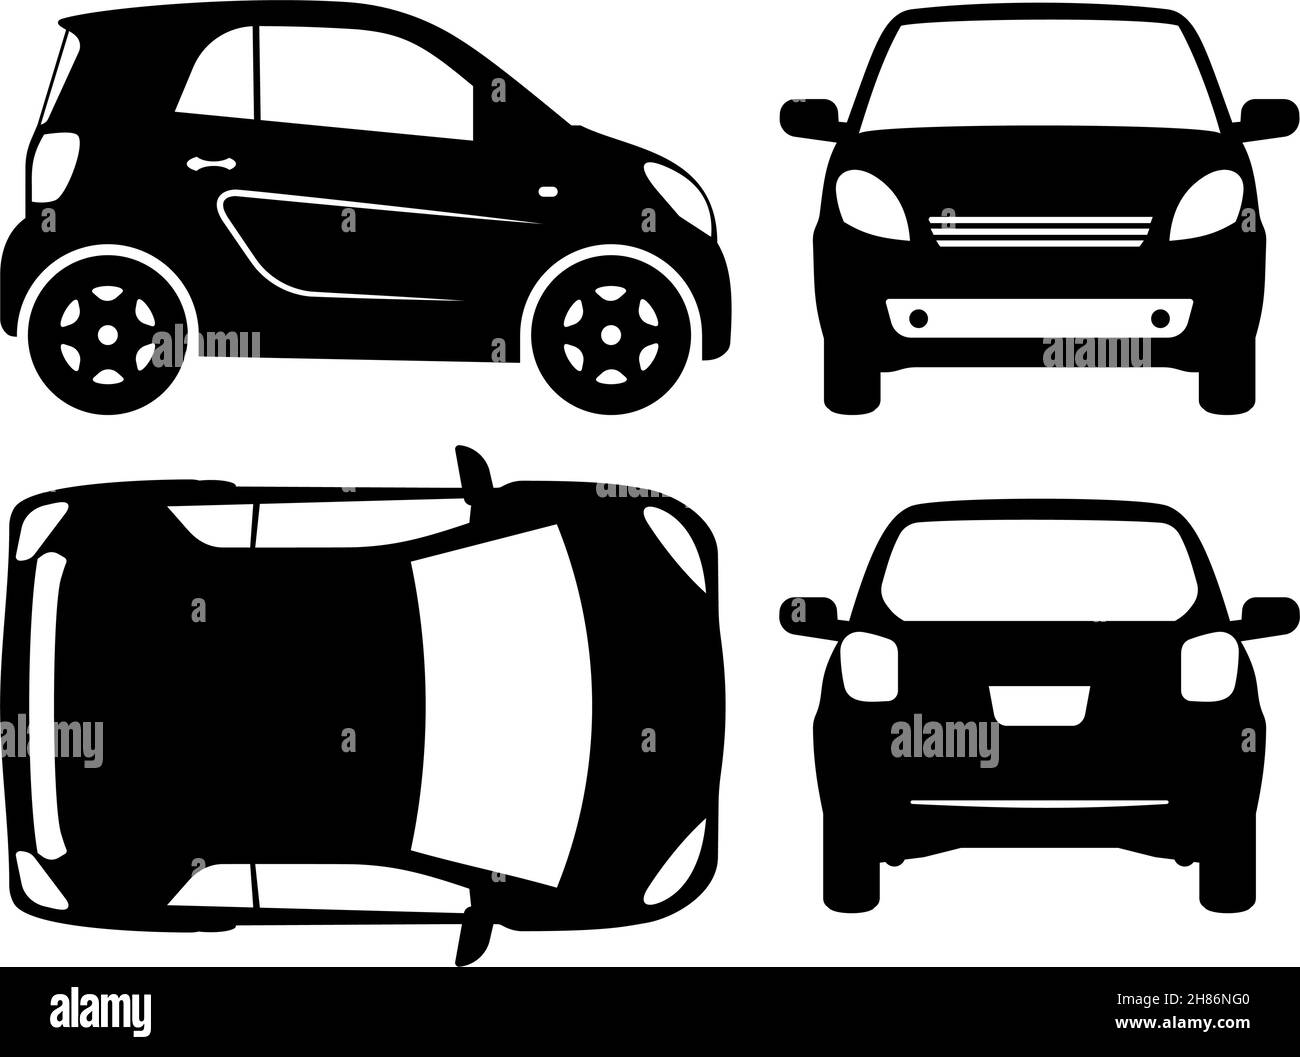 Small car silhouette on white background. Vehicle icons set view from side, front, back, and top Stock Vector